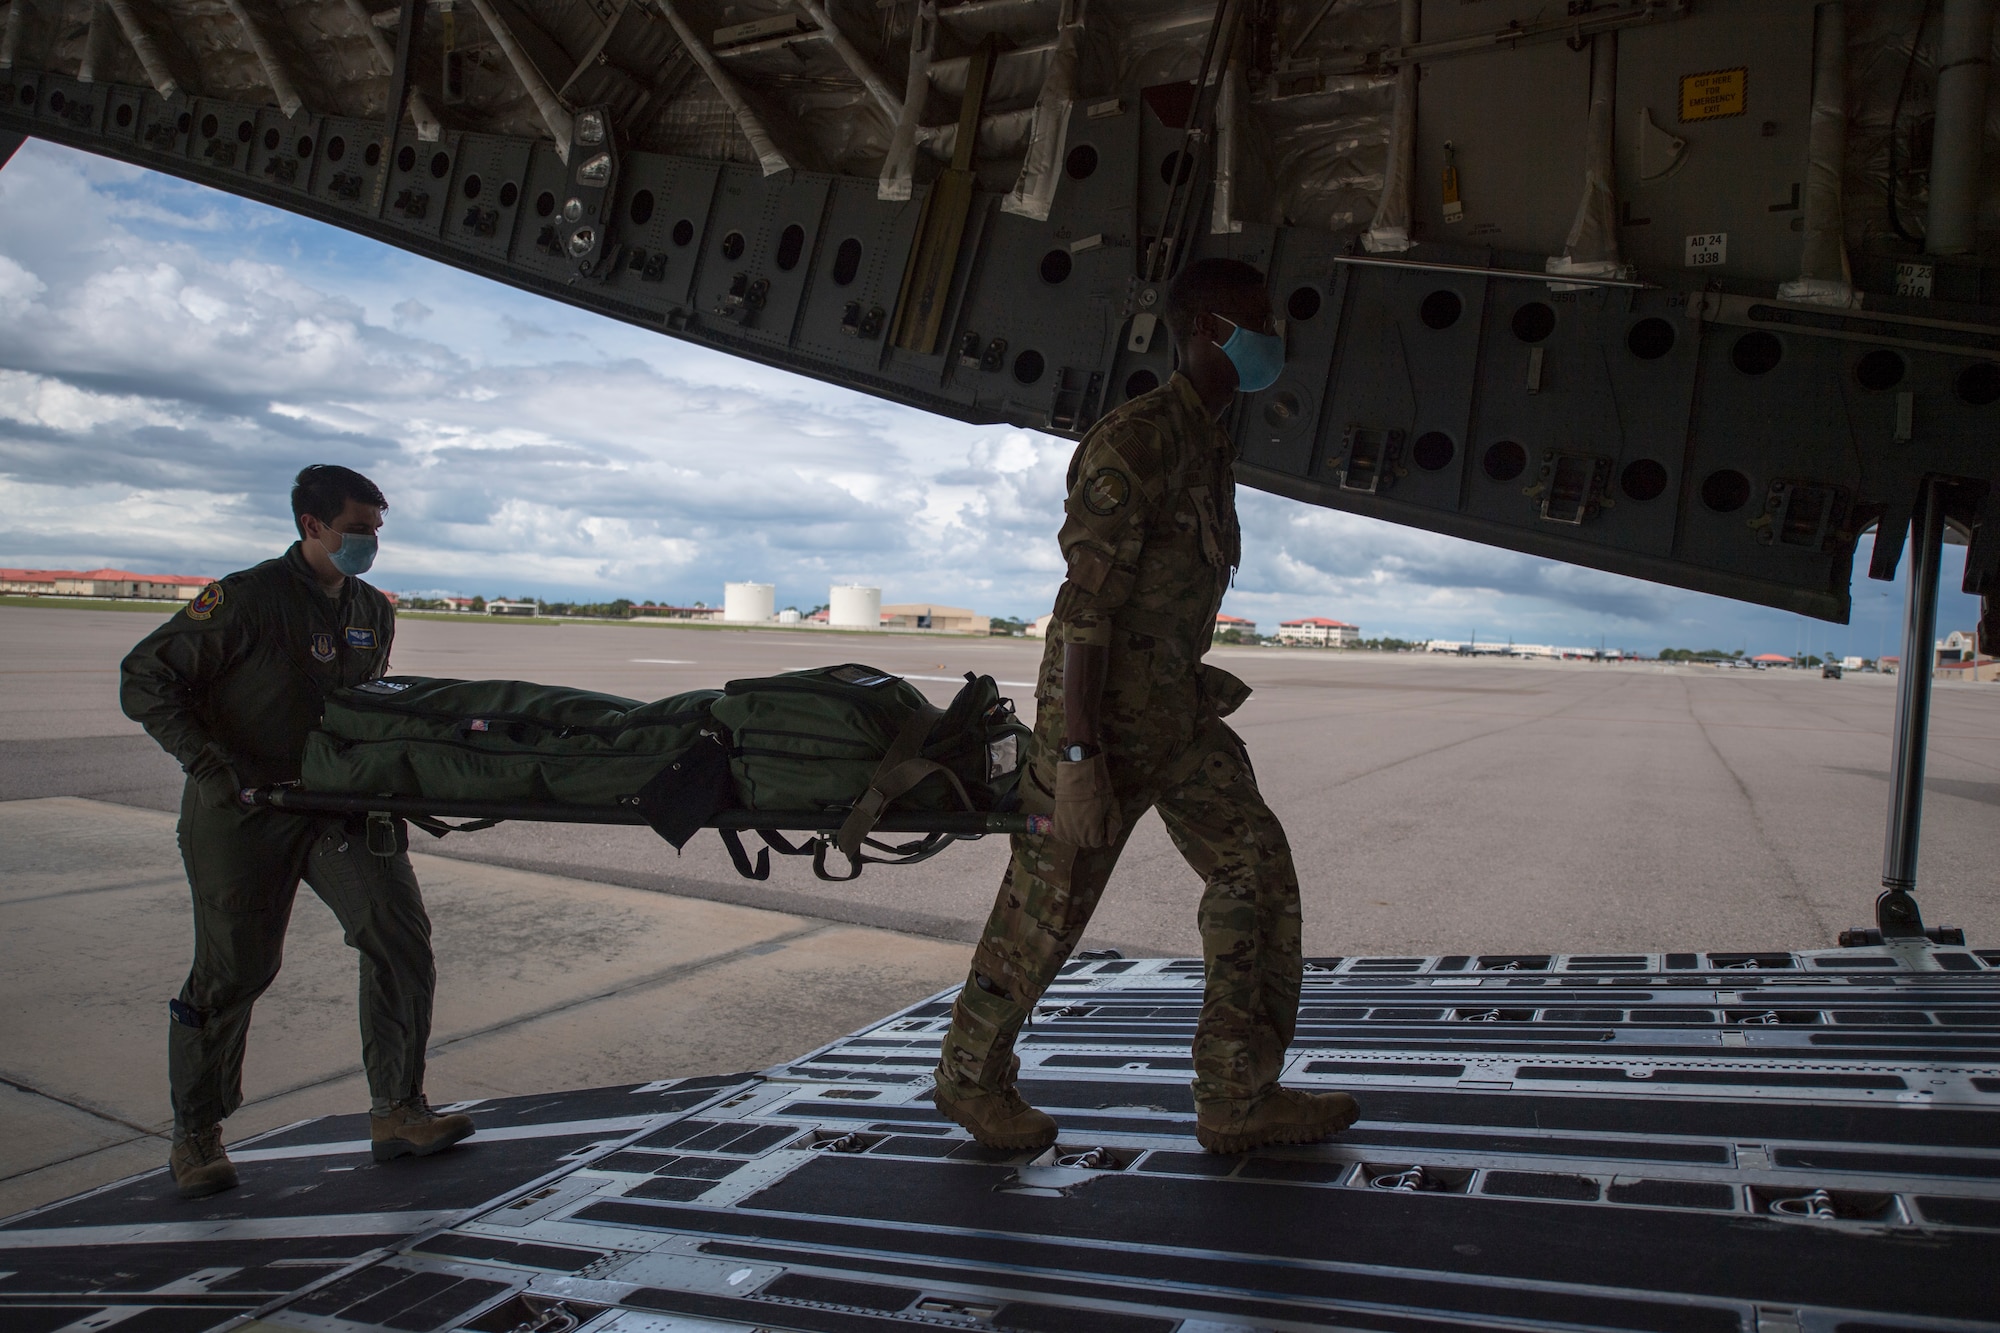 Members of the 908th Aeromedical Evacuation Squadron, Maxwell Air Force Base, Alabama, and the 45th AES, carry a litter of medical supplies onboard a C-17 Globemaster III aircraft assigned to the 512th Airlift Wing, Dover AFB, Delaware, at MacDill AFB, Florida, Aug. 21, 2020. The 908th AES teamed up with the 927th Air Refueling Wing’s 45th AES to conduct on-the-ground and aerial medical training to maximize mission readiness. (U.S. Air Force photo by Staff Sgt. Adam R. Shanks)